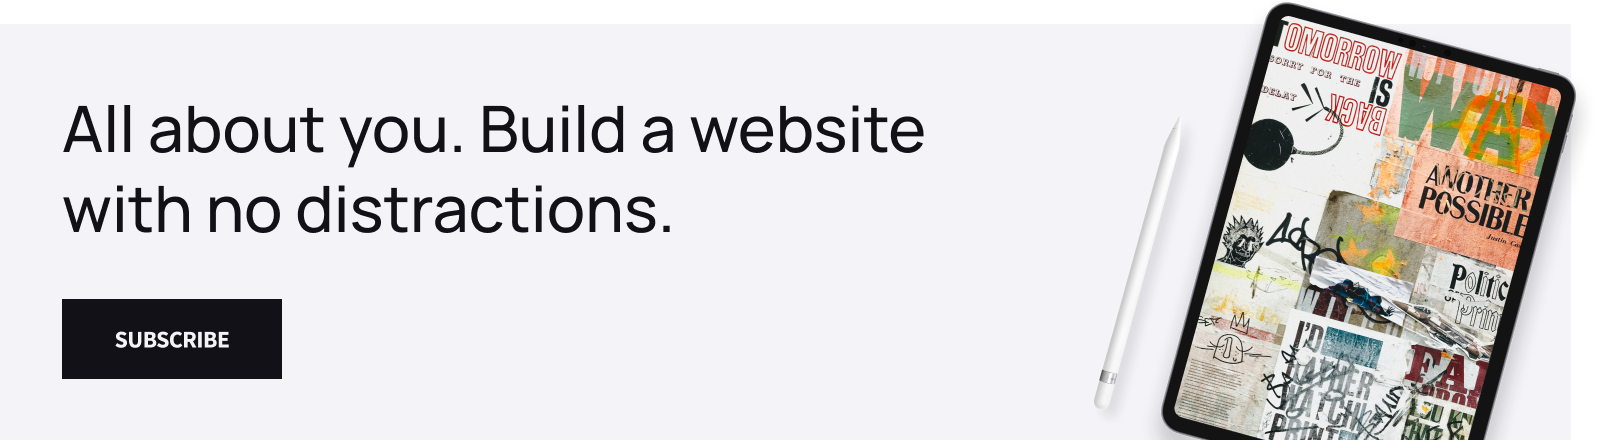 A banner saying "All about you. Build a website with no distractions." with a subscribe button.